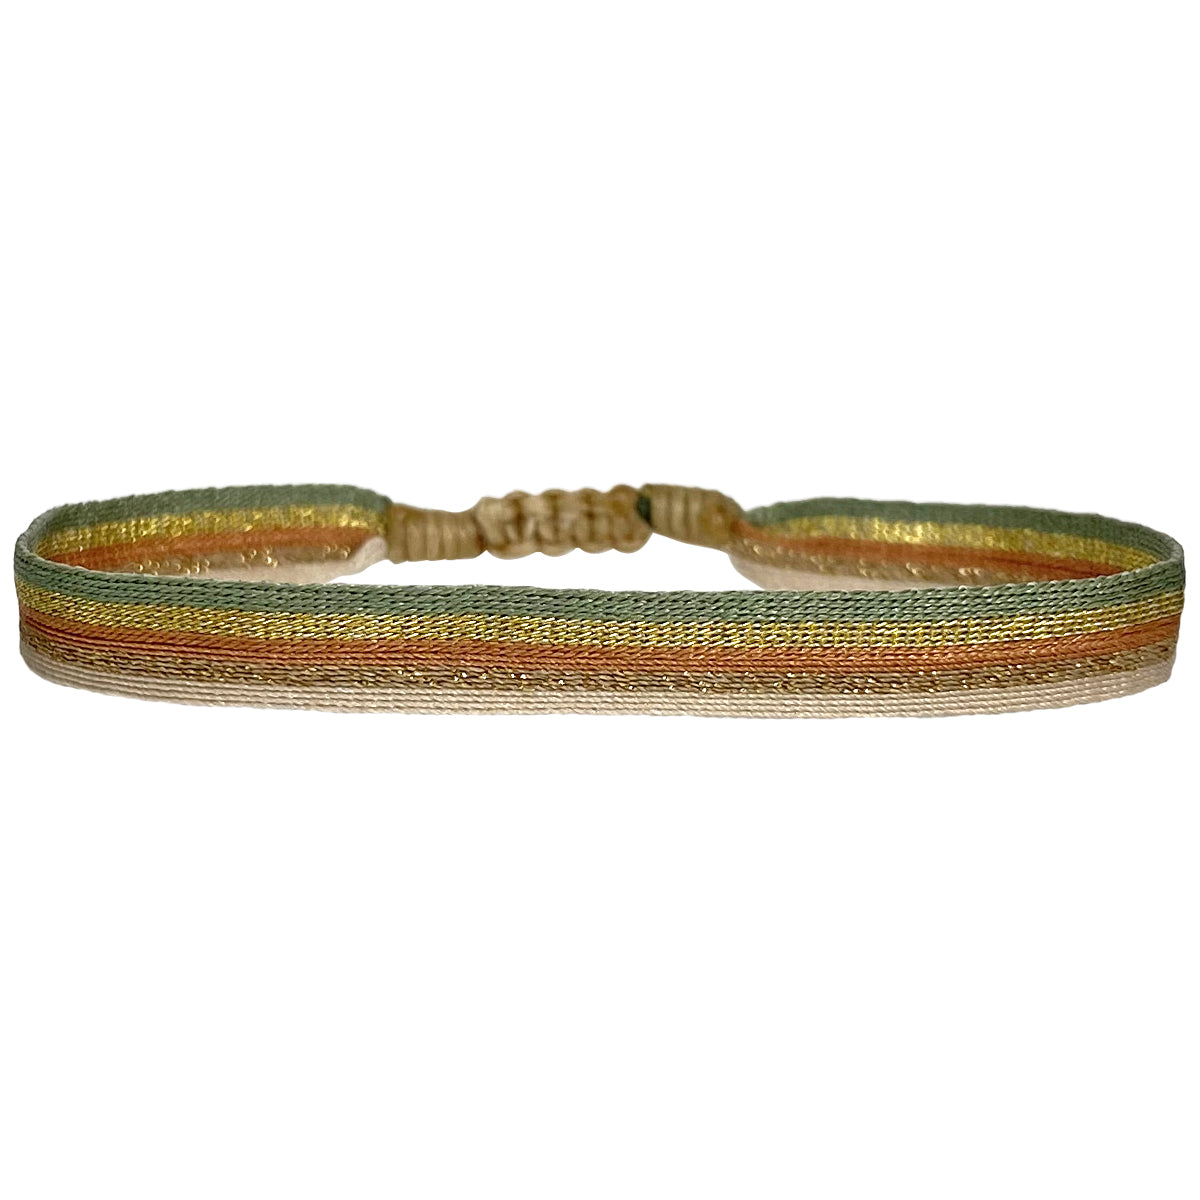 STRIPED BASIC HANDWOVEN SPARKLE BRACELET WITH GOLD, GREEN AND ORANGE